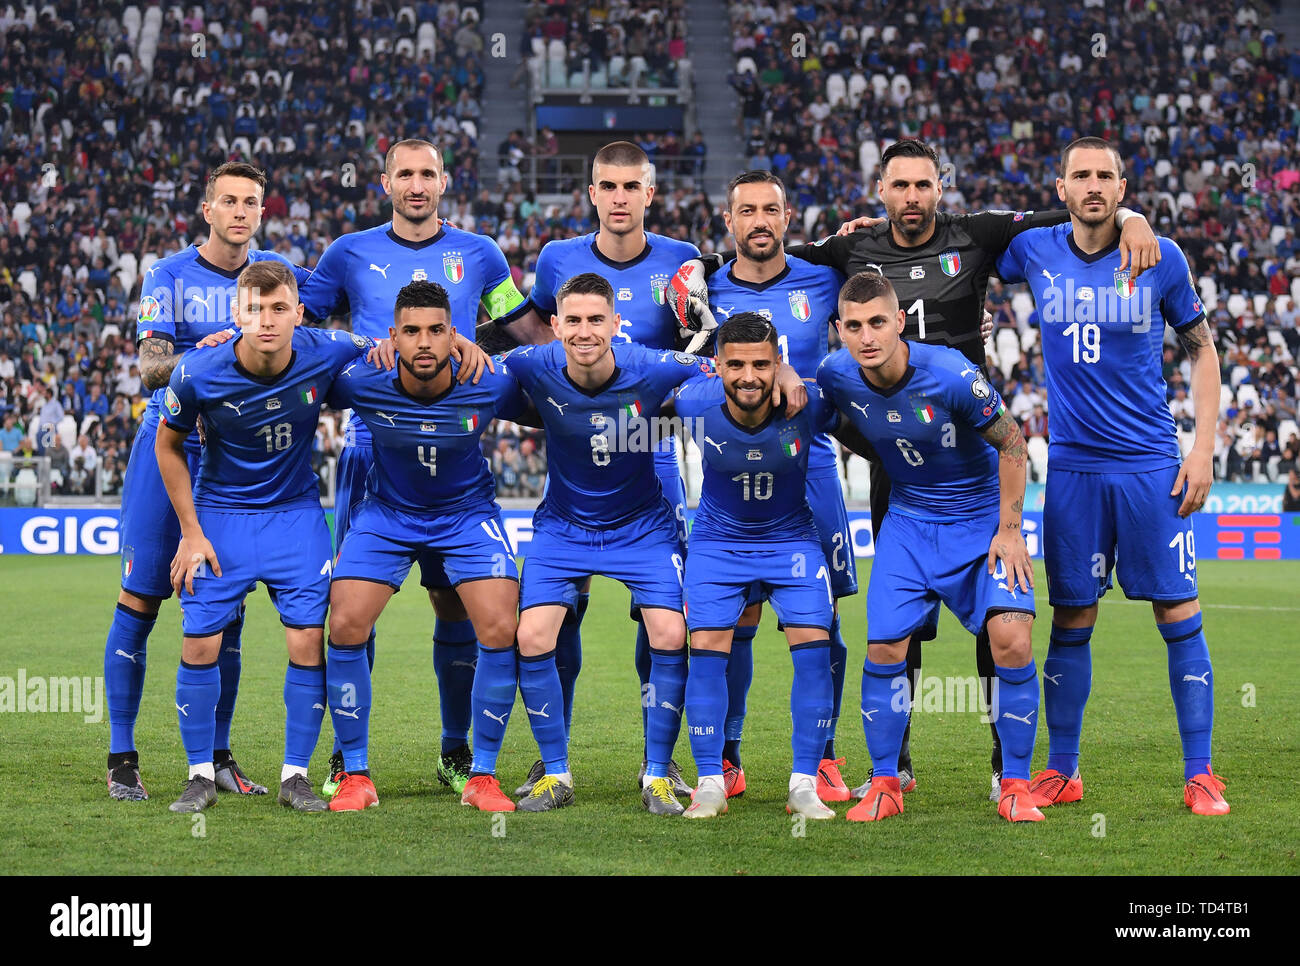 Turin, Italy. 11th June, 2019. Italy's players pose for a team photo before the UEFA Euro 2020 Group J qualifier soccer match between Italy and Bosnia and Herzegovina in Turin, Italy, June 11, 2019. Italy won 2-1. Credit: Alberto Lingria/Xinhua/Alamy Live News Stock Photo